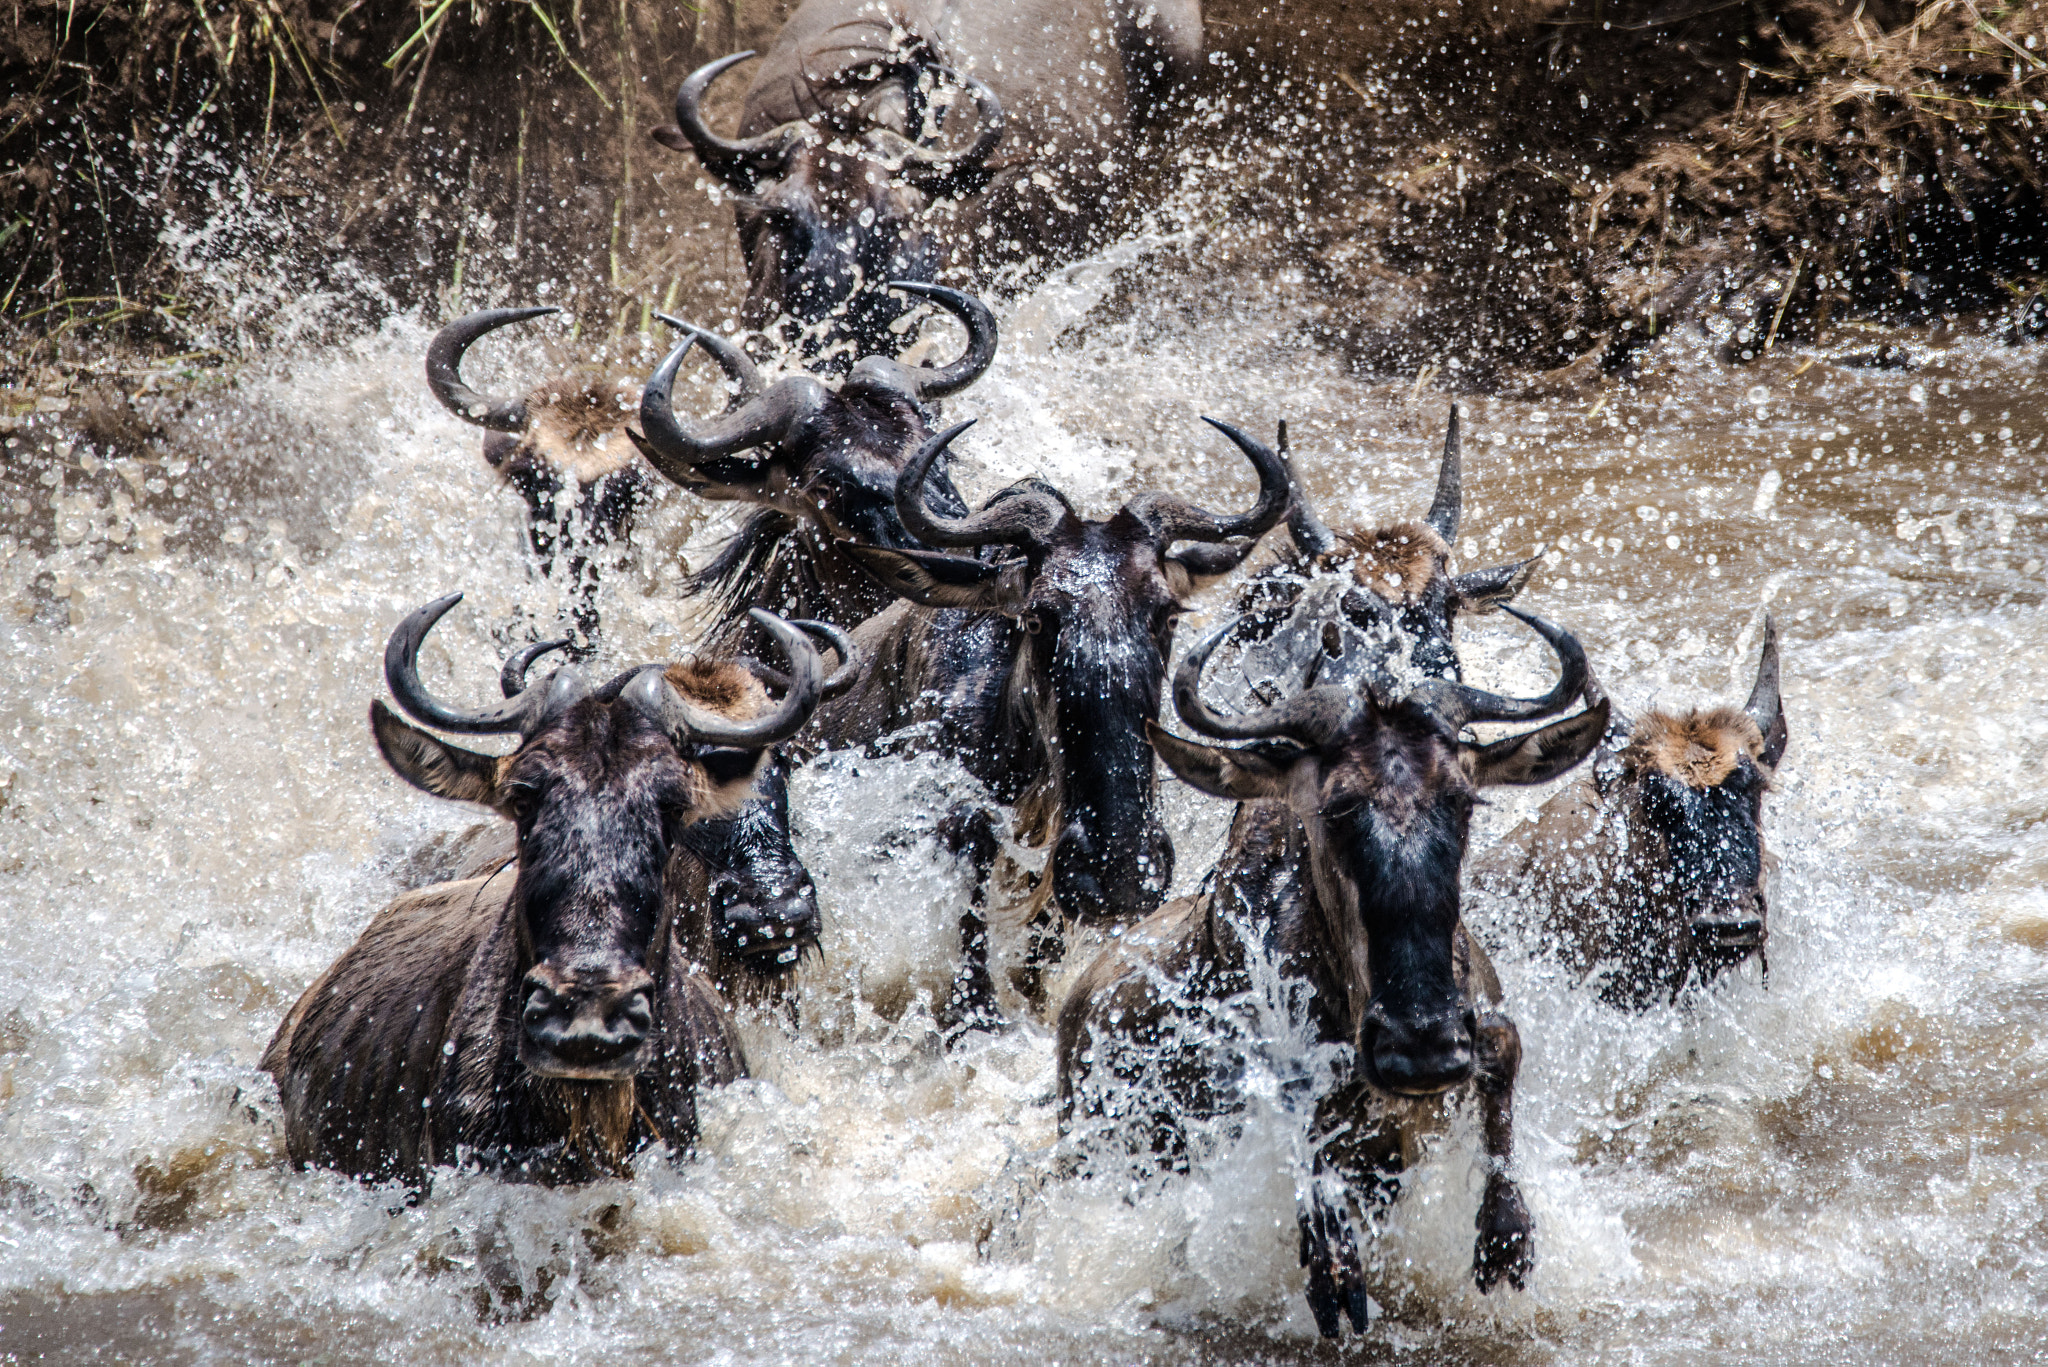 Nikon D800 + Sigma 150-600mm F5-6.3 DG OS HSM | C sample photo. The great migration photography